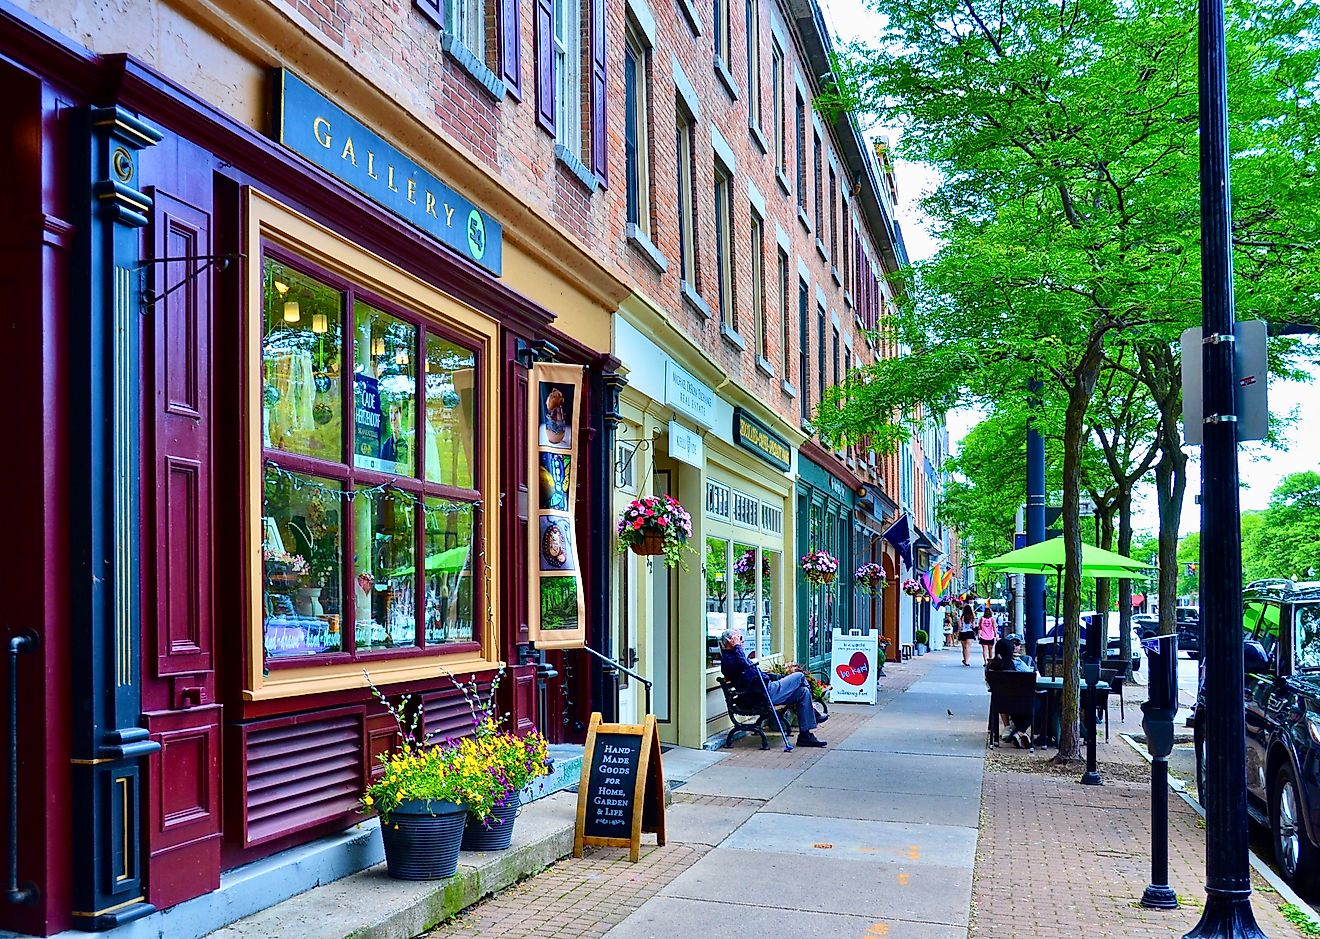 Street view of Skaneateles, New York, a charming lakeside town atop one of the Finger Lakes, just 20 miles from Syracuse. Editorial credit: PQK / Shutterstock.com